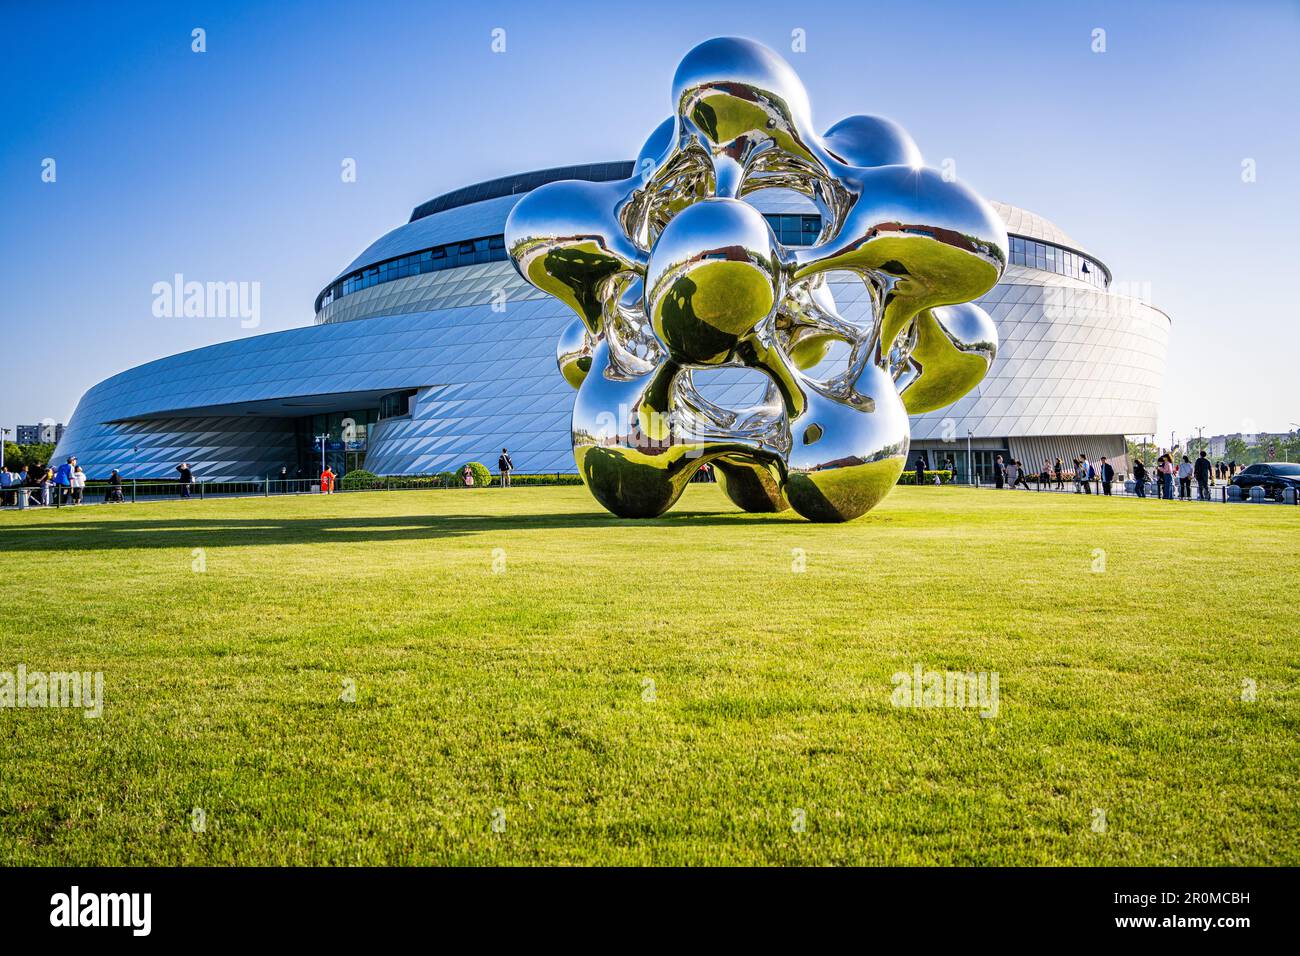 The Shanghai Astronomy Museum in Lingang, Pudong New Area, Shanghai, China. Stock Photo